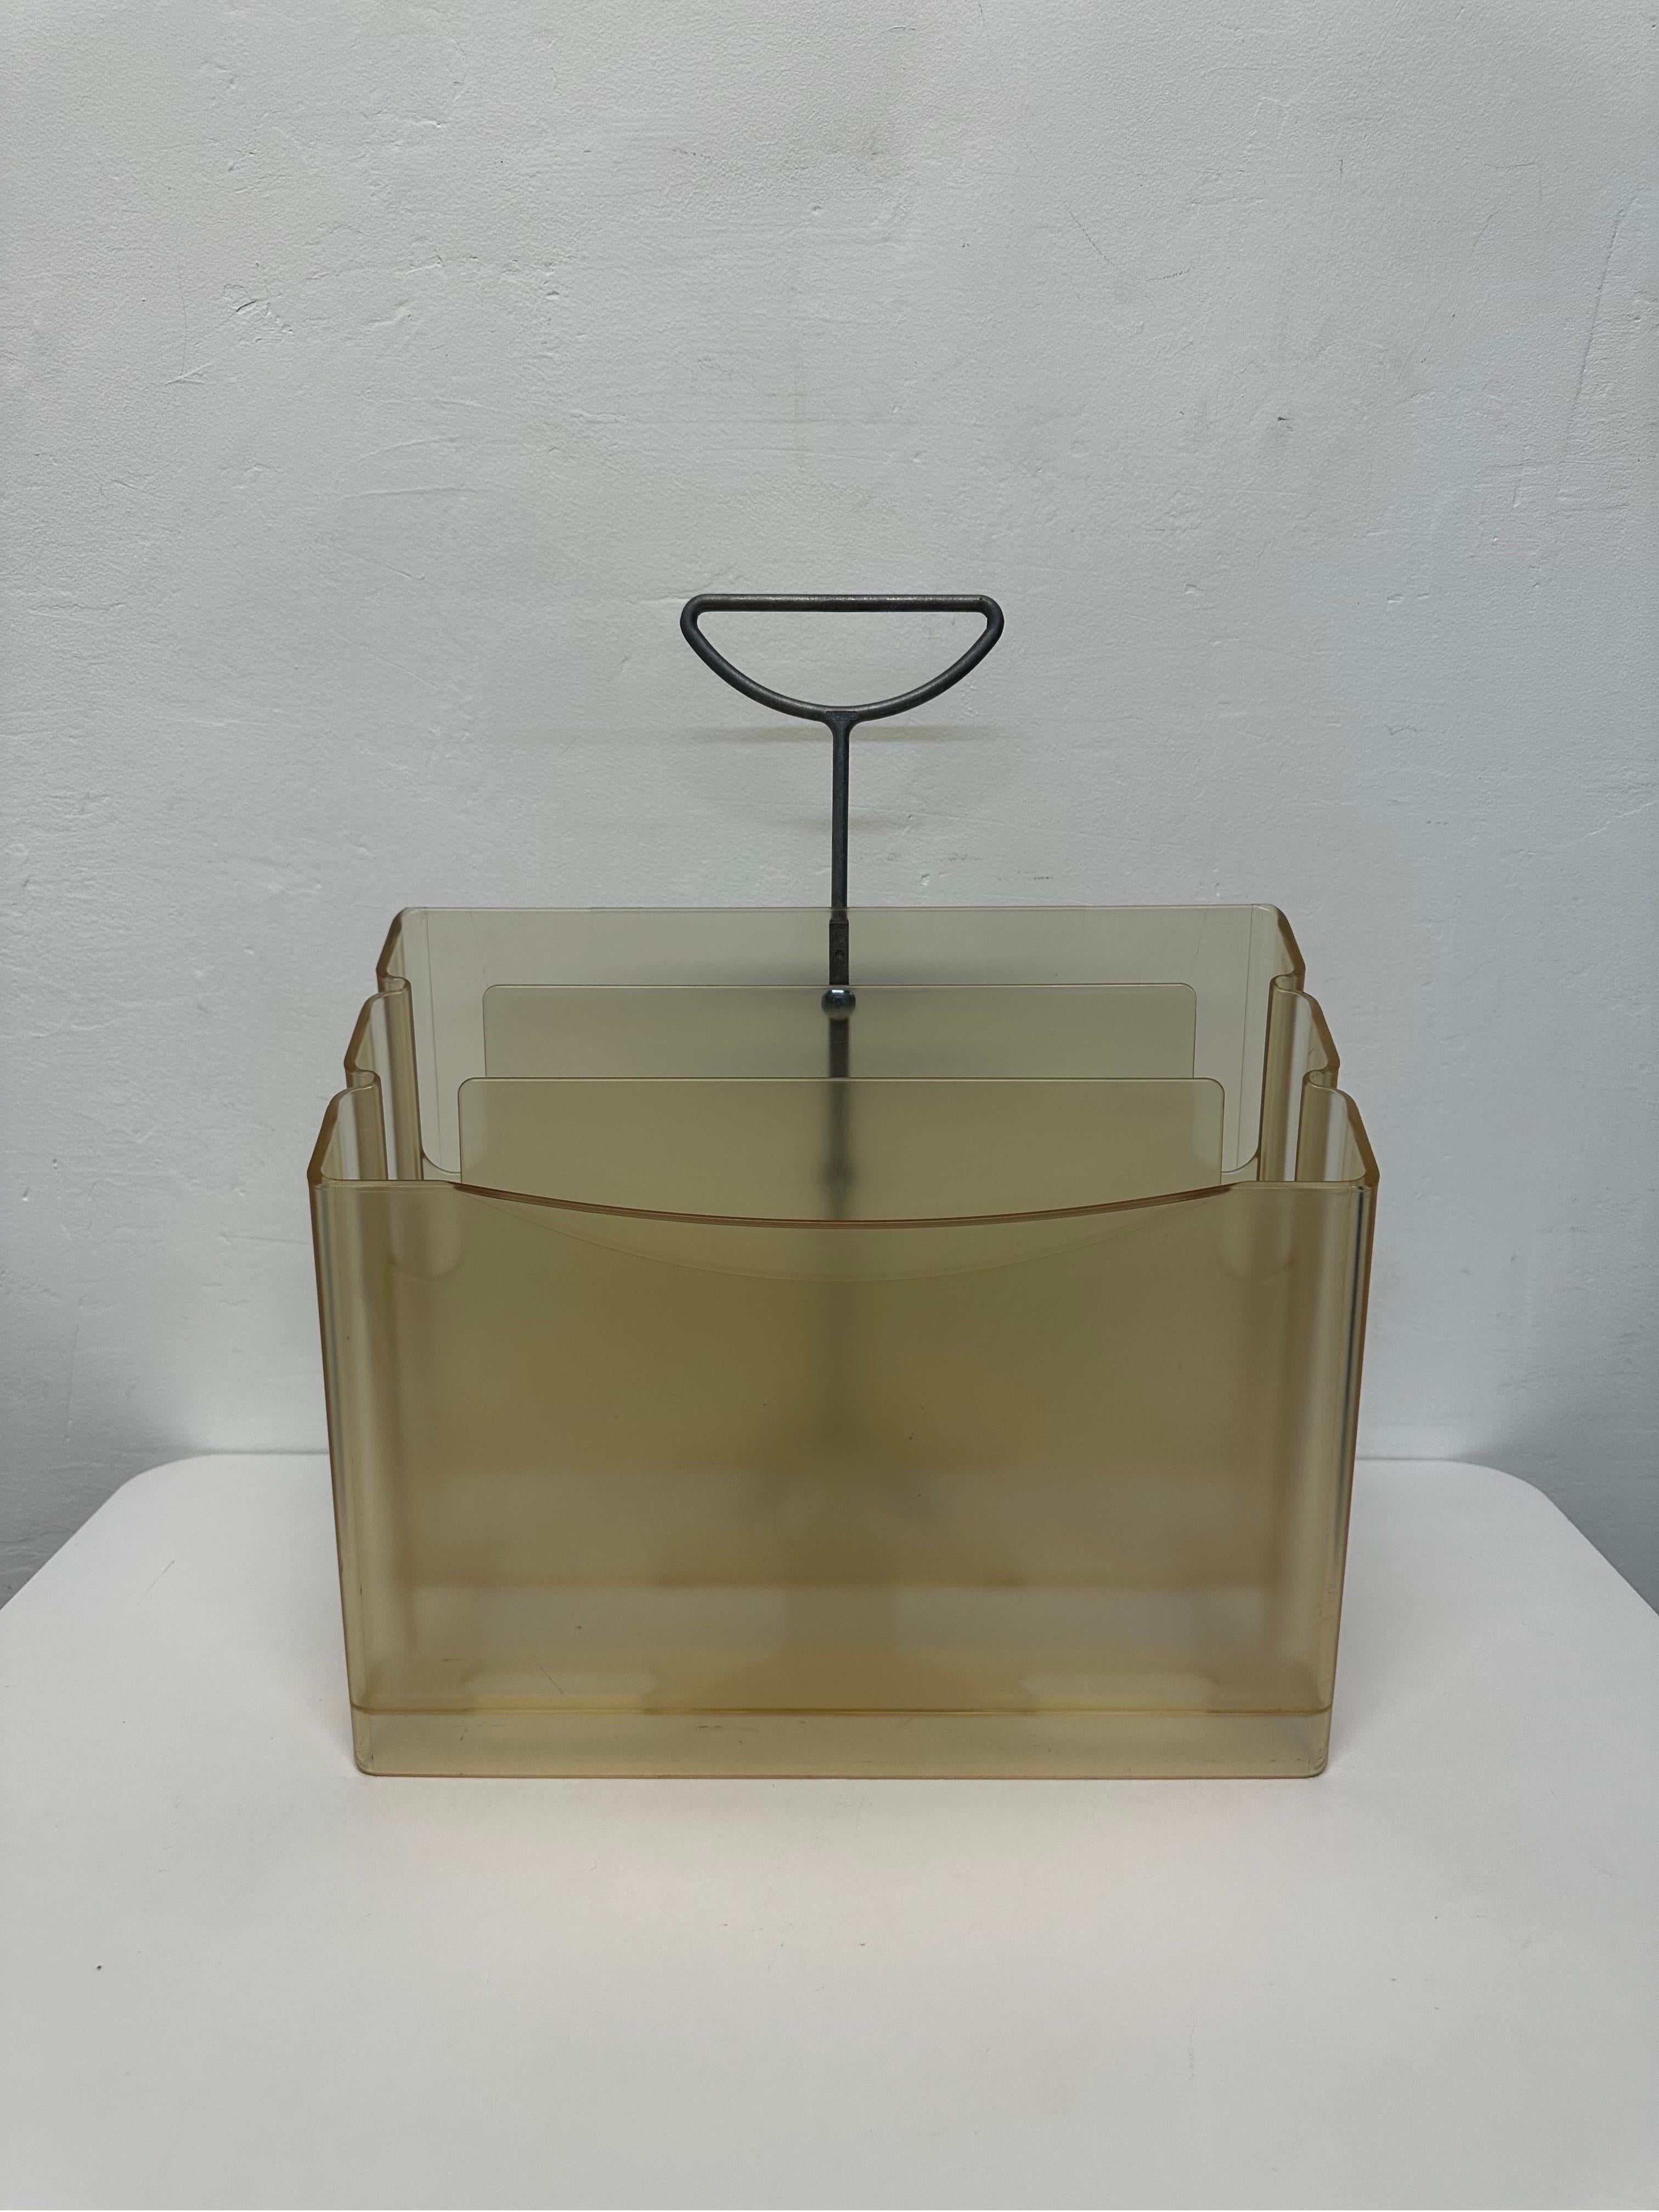 Postmodern transparent tan colored plastic magazine rack by Andries & Hiroko van Onck for Magis Italy, 1991.  Great for holding magazines or books and easily transportable with handle.